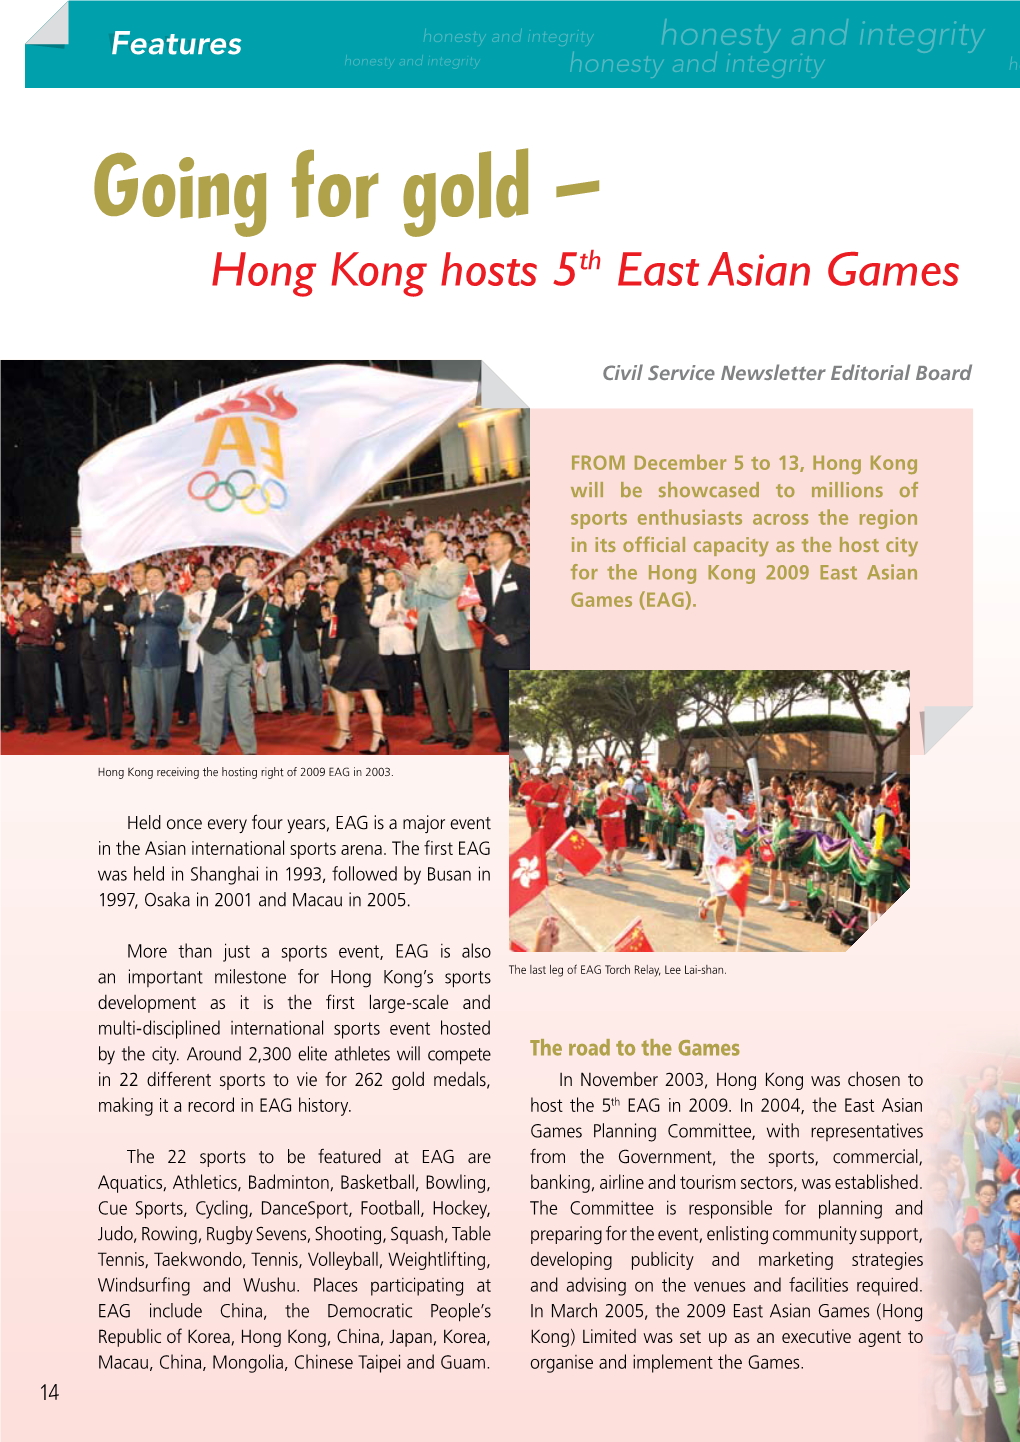 Going for Gold – Hong Kong Hosts 5Th East Asian Games